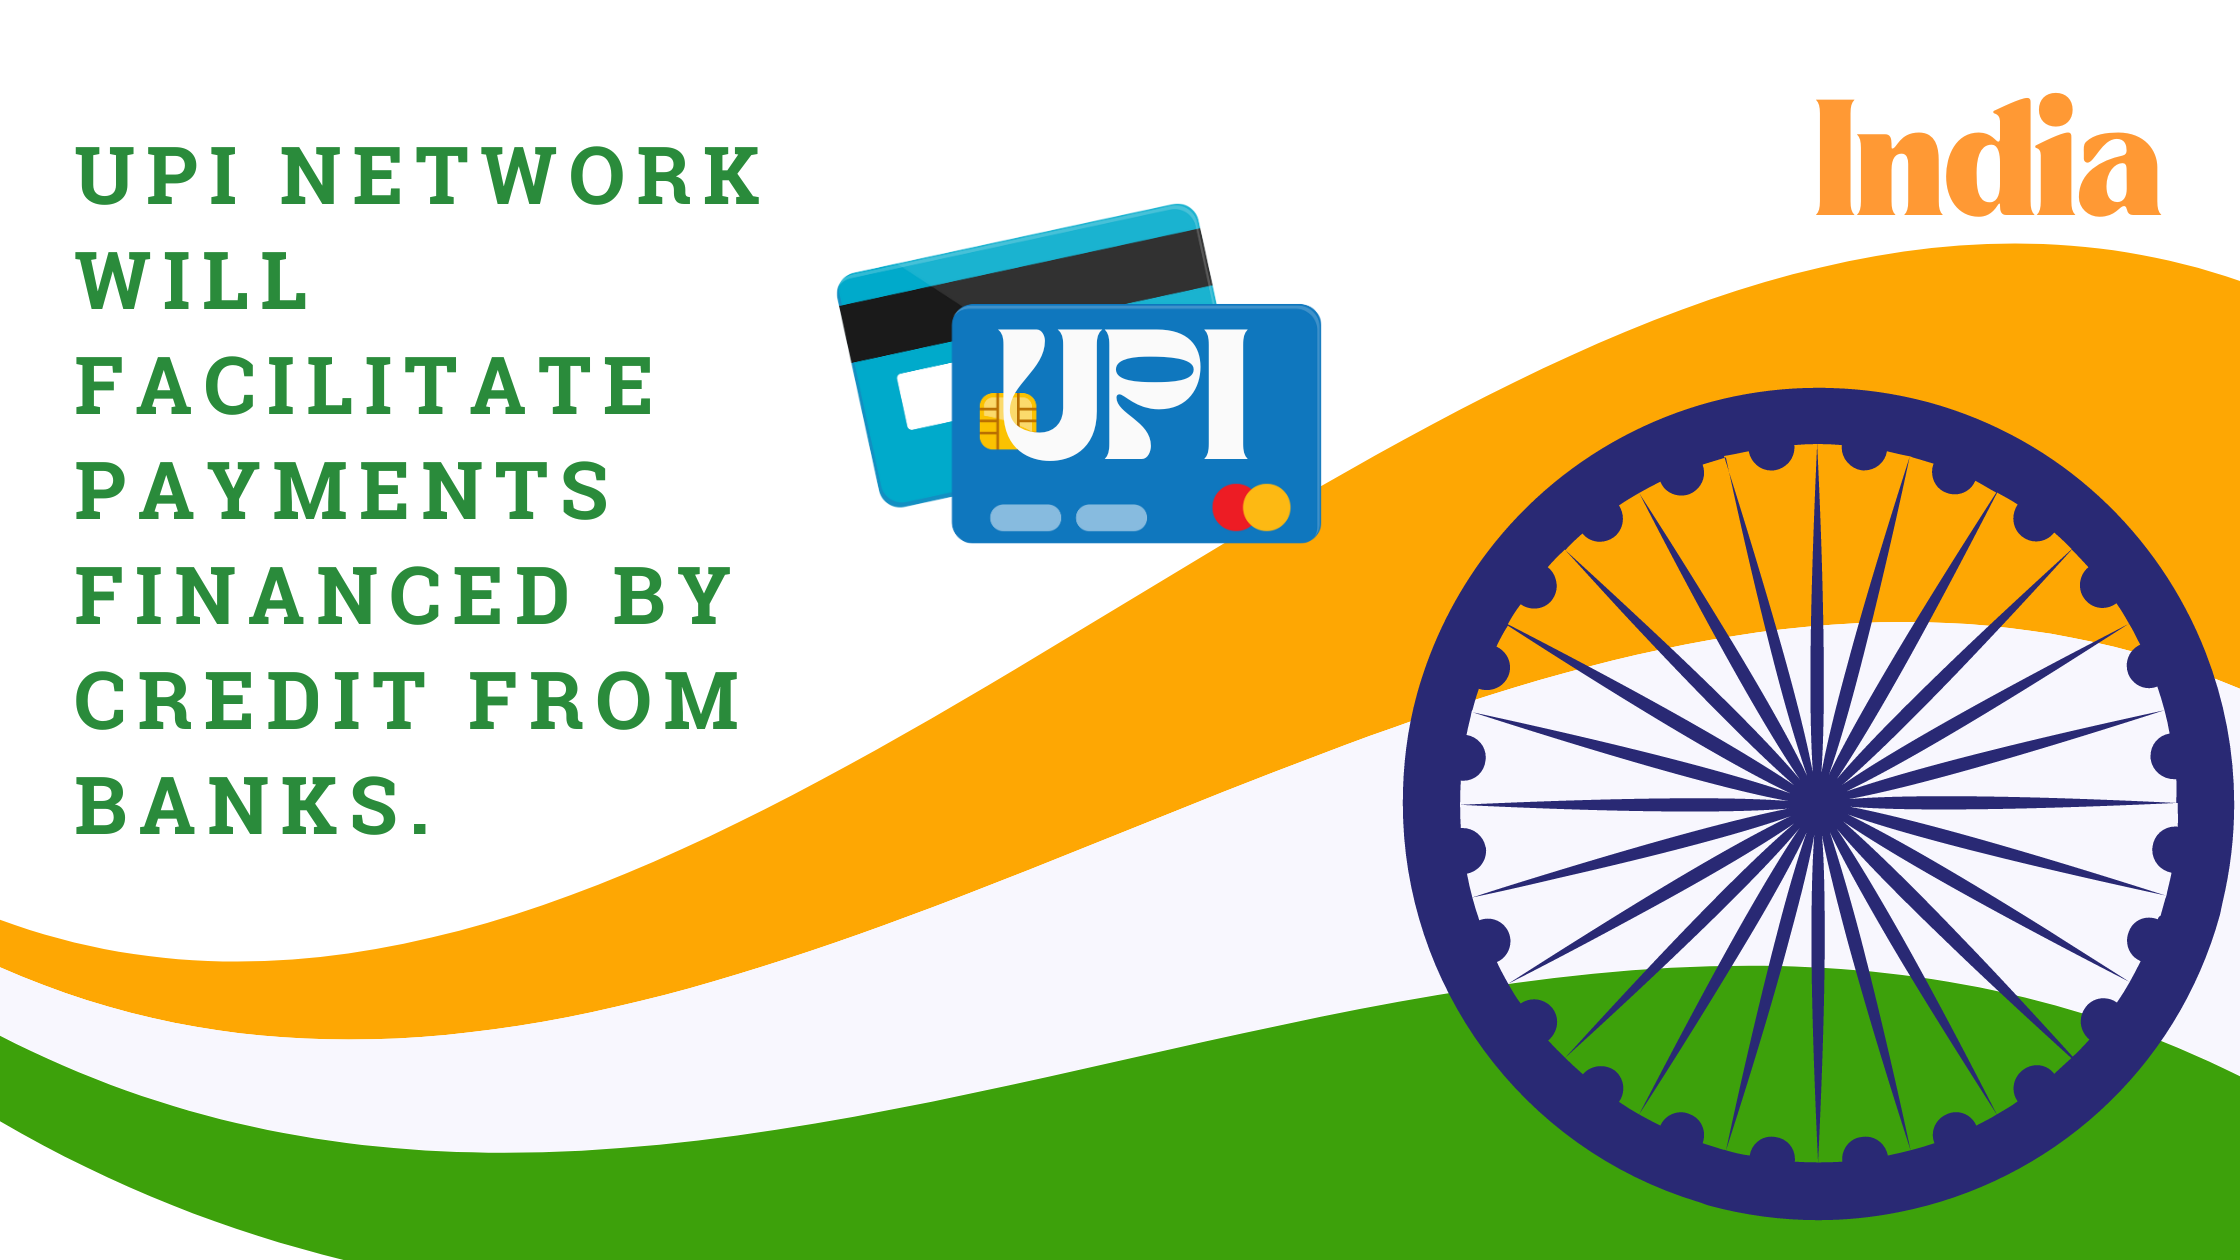 UPI network will facilitate payments financed by credit from banks.